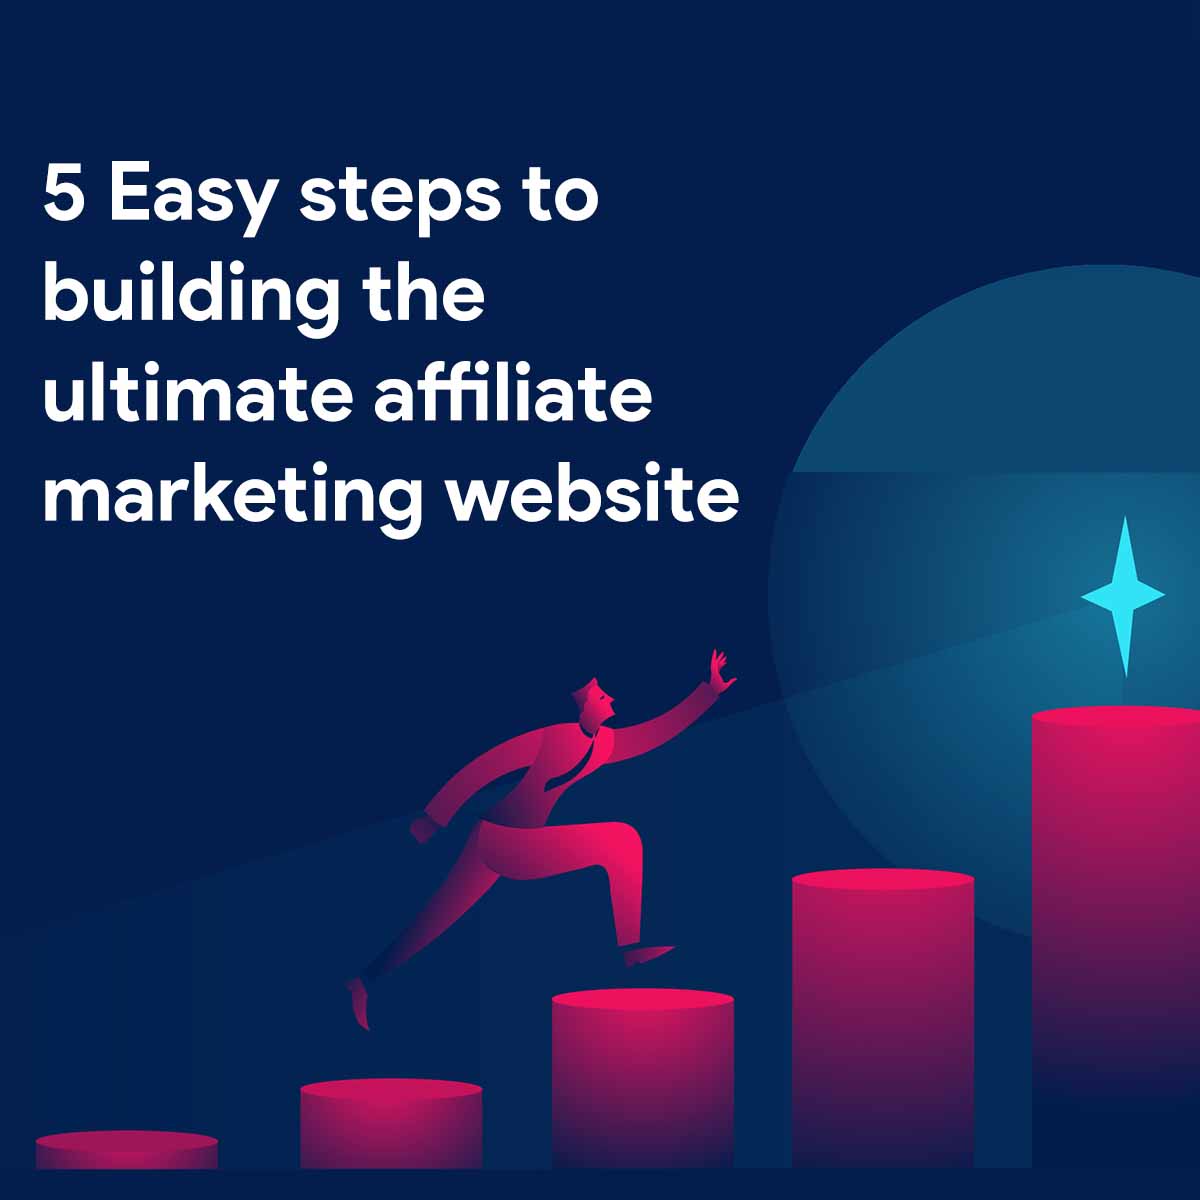 eBook - 5 Easy Steps to Building The Ultimate Affiliate Marketing Website